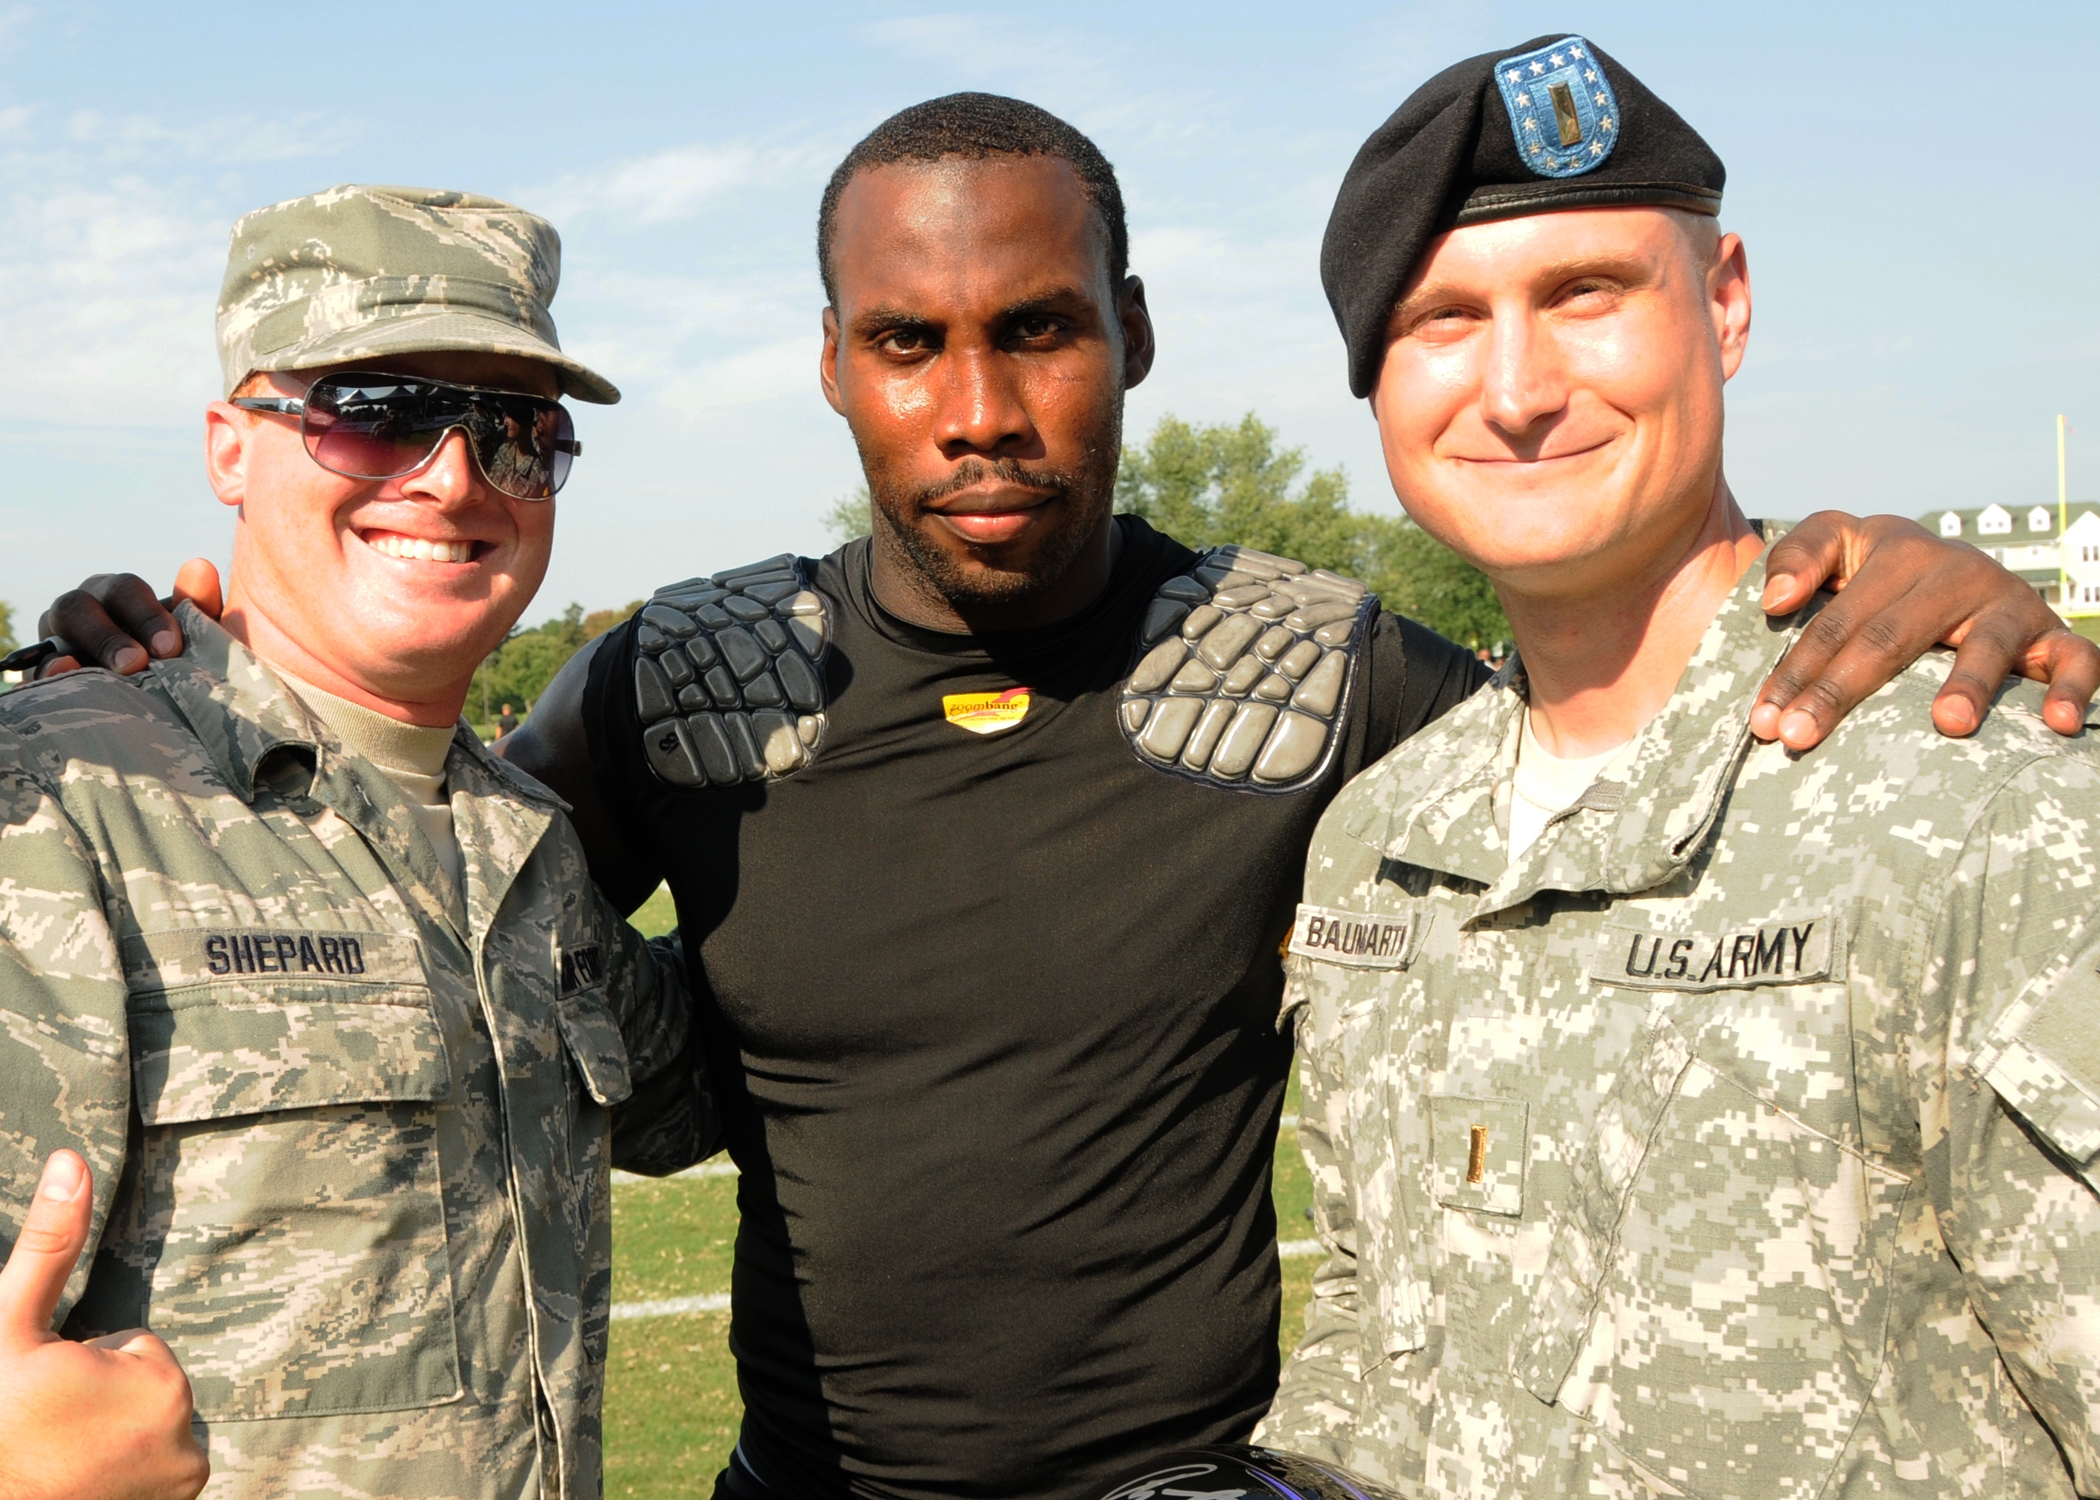 Boldin  retires, stating he’s: “drawn to make the larger fight for human rights a priority.”